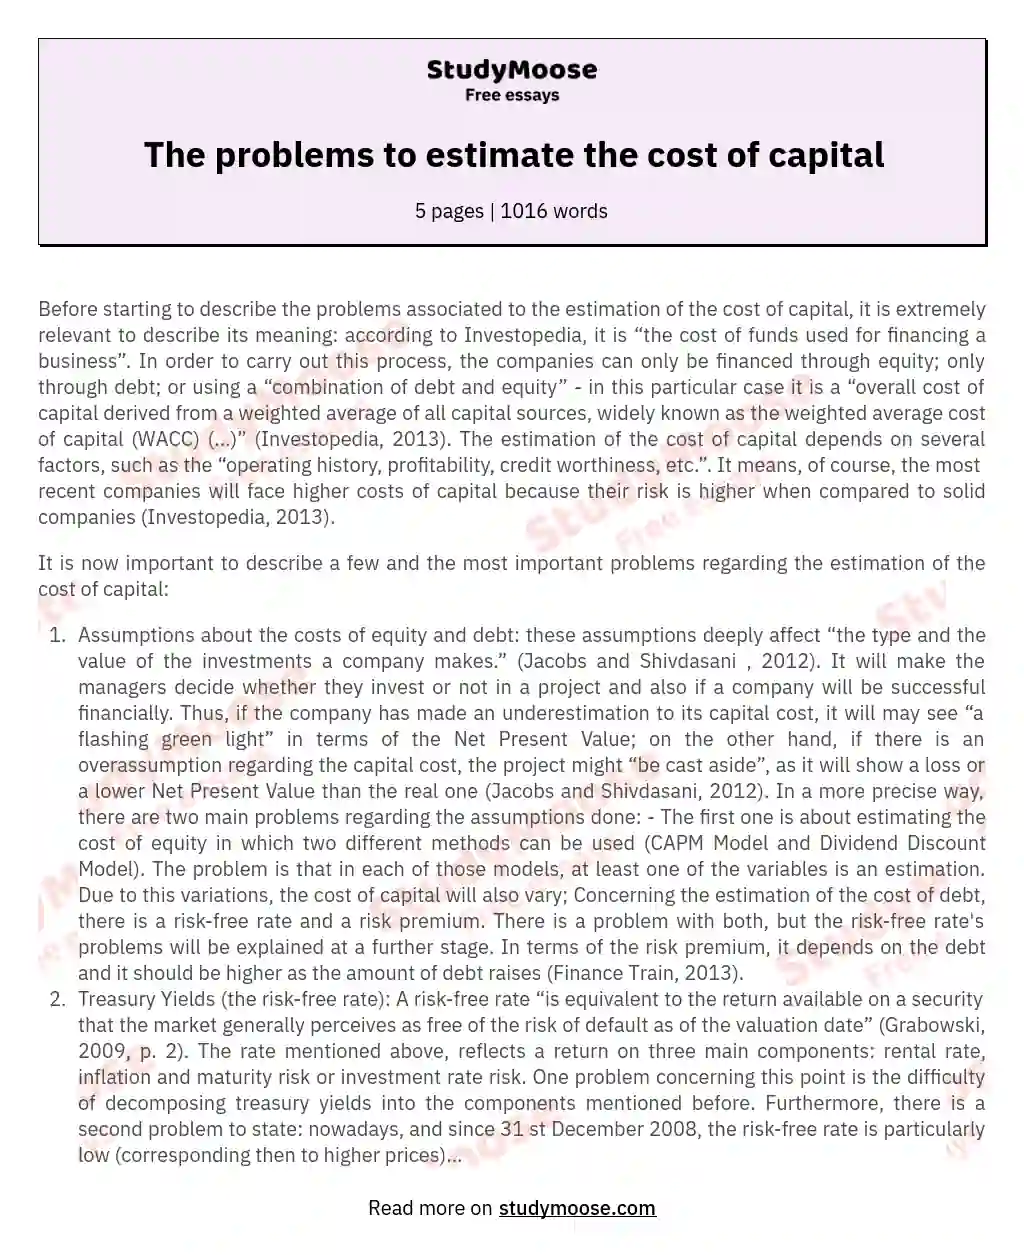 The problems to estimate the cost of capital